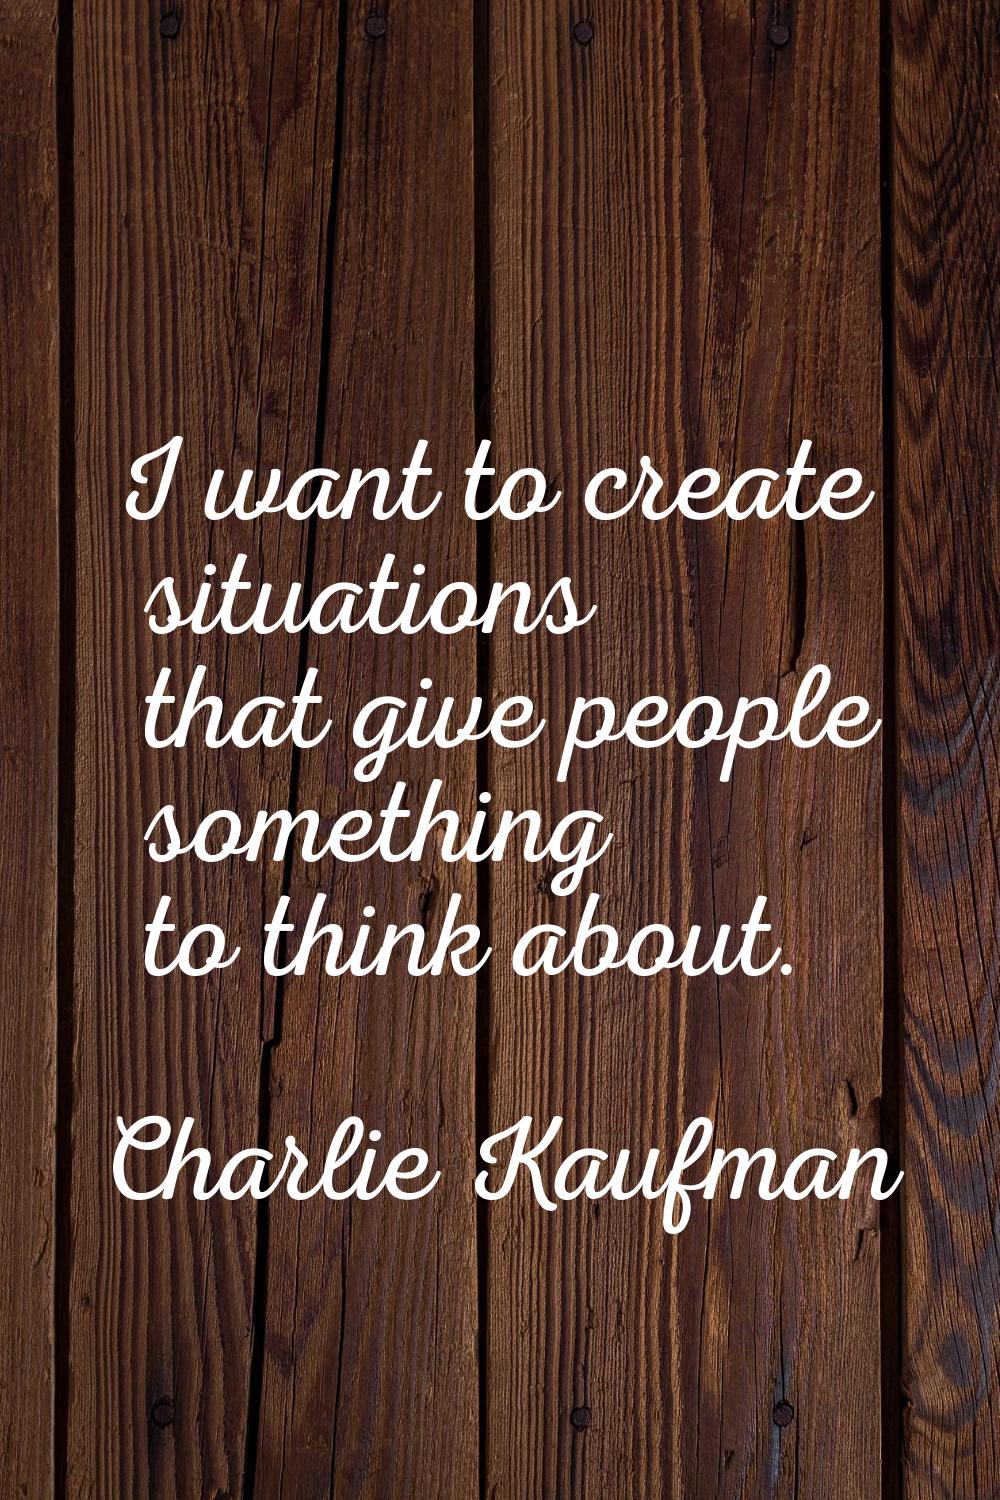 I want to create situations that give people something to think about.